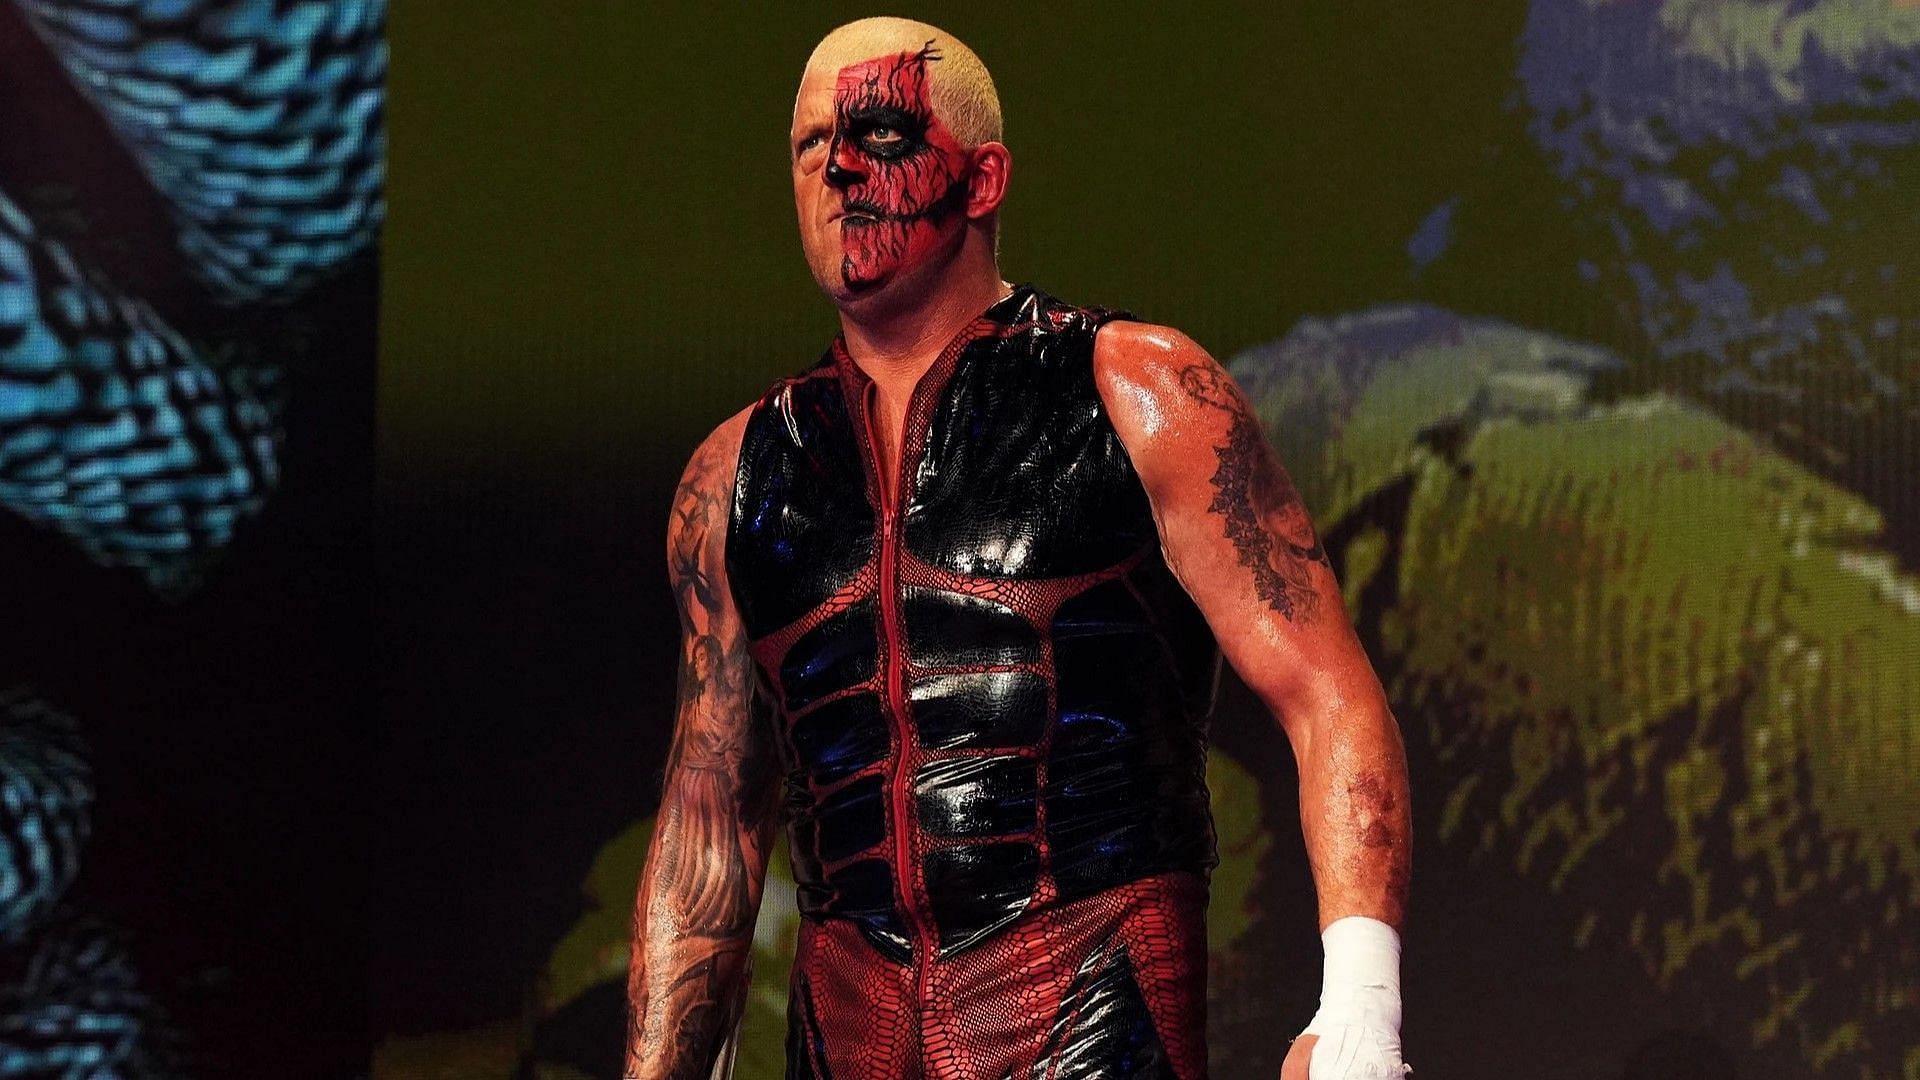 Dustin Rhodes heads to the ring on AEW Rampage